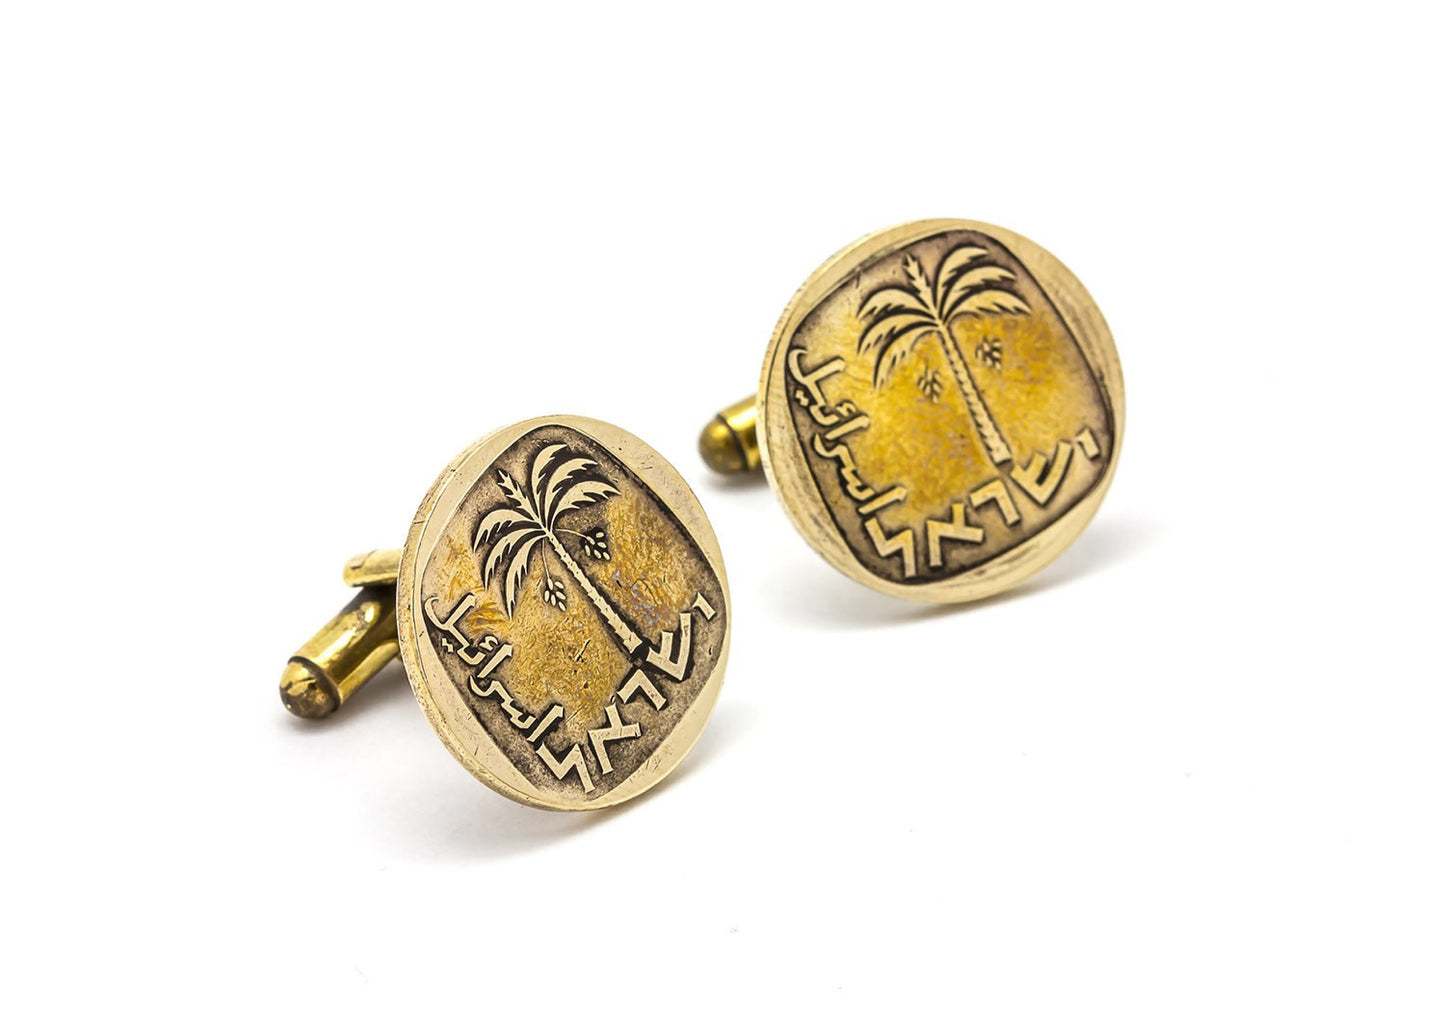 Israeli Coin Cufflinks with 10 Agorot Coin of Israel